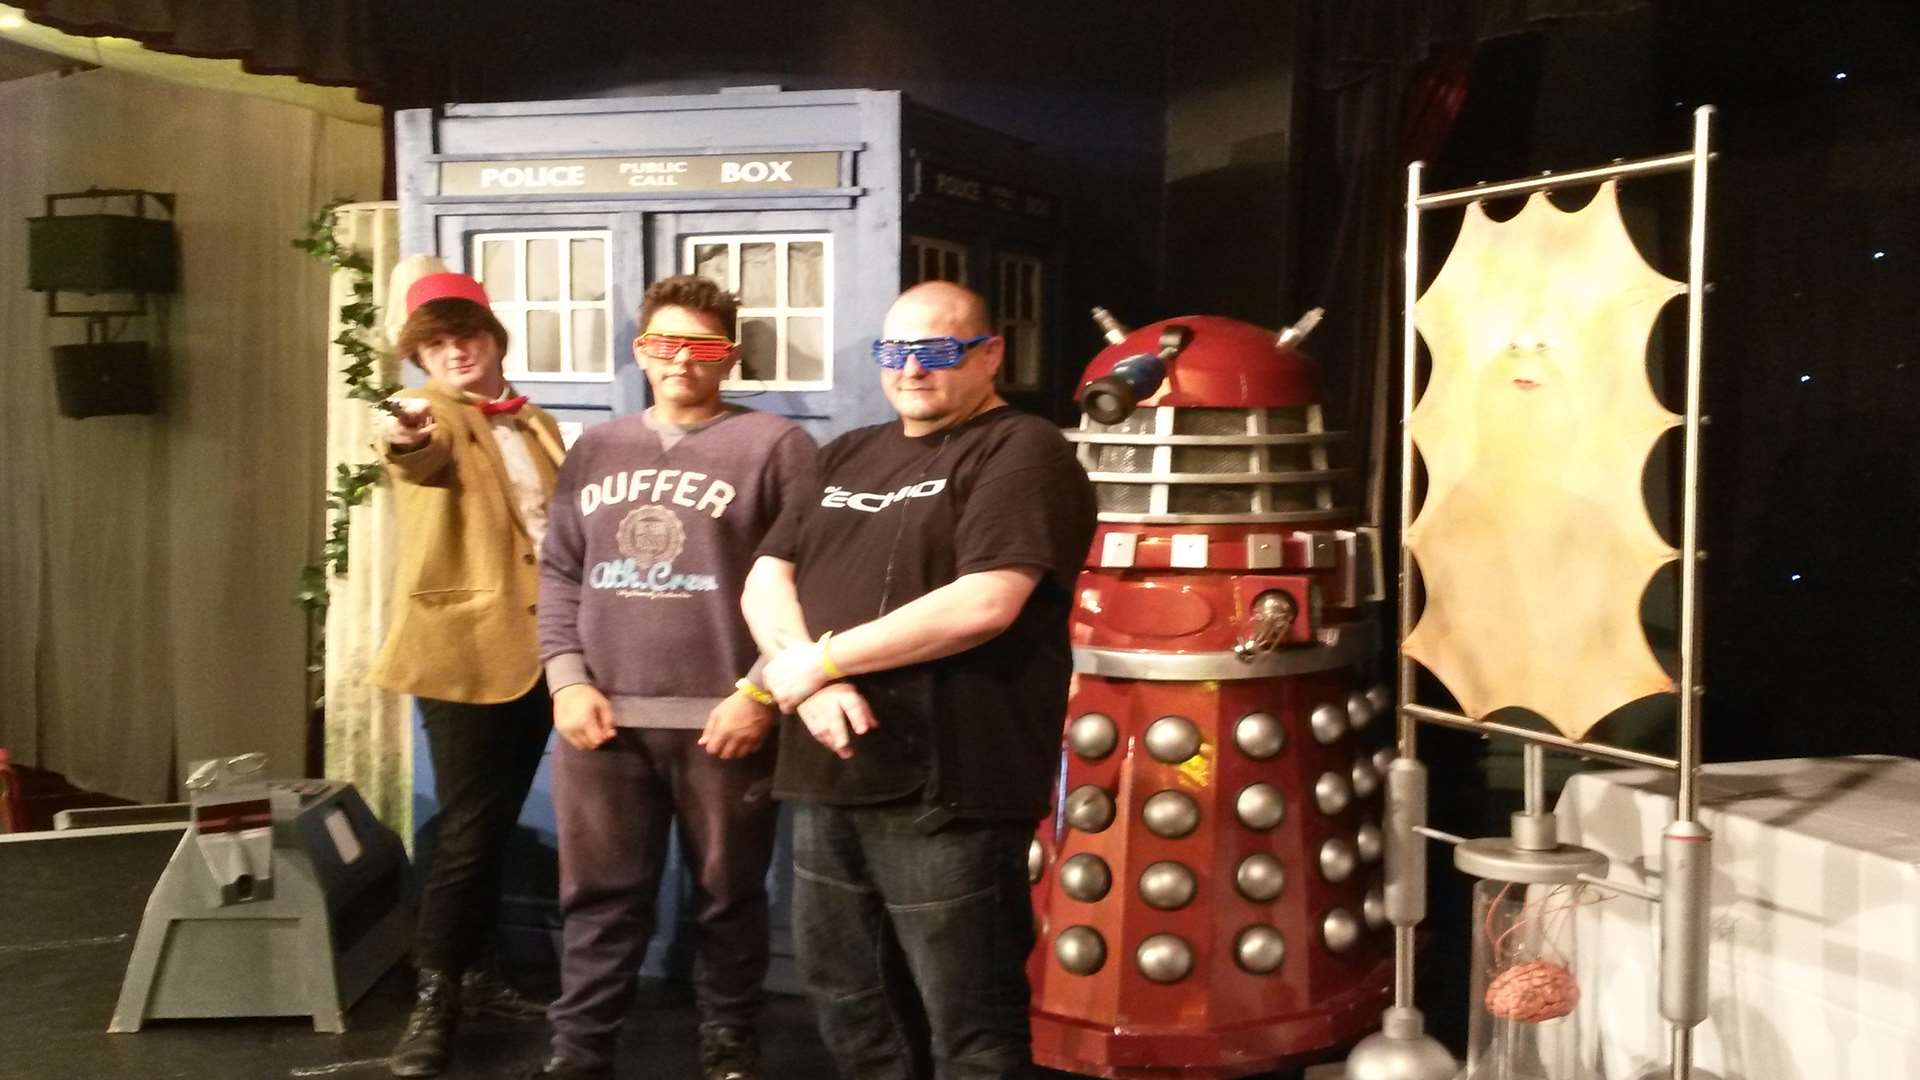 "Dr Who" Jason Hodgson, DJ Echo and DJ Echo Jr on stage at Thanet Cosplay's Dr Who exhibition.